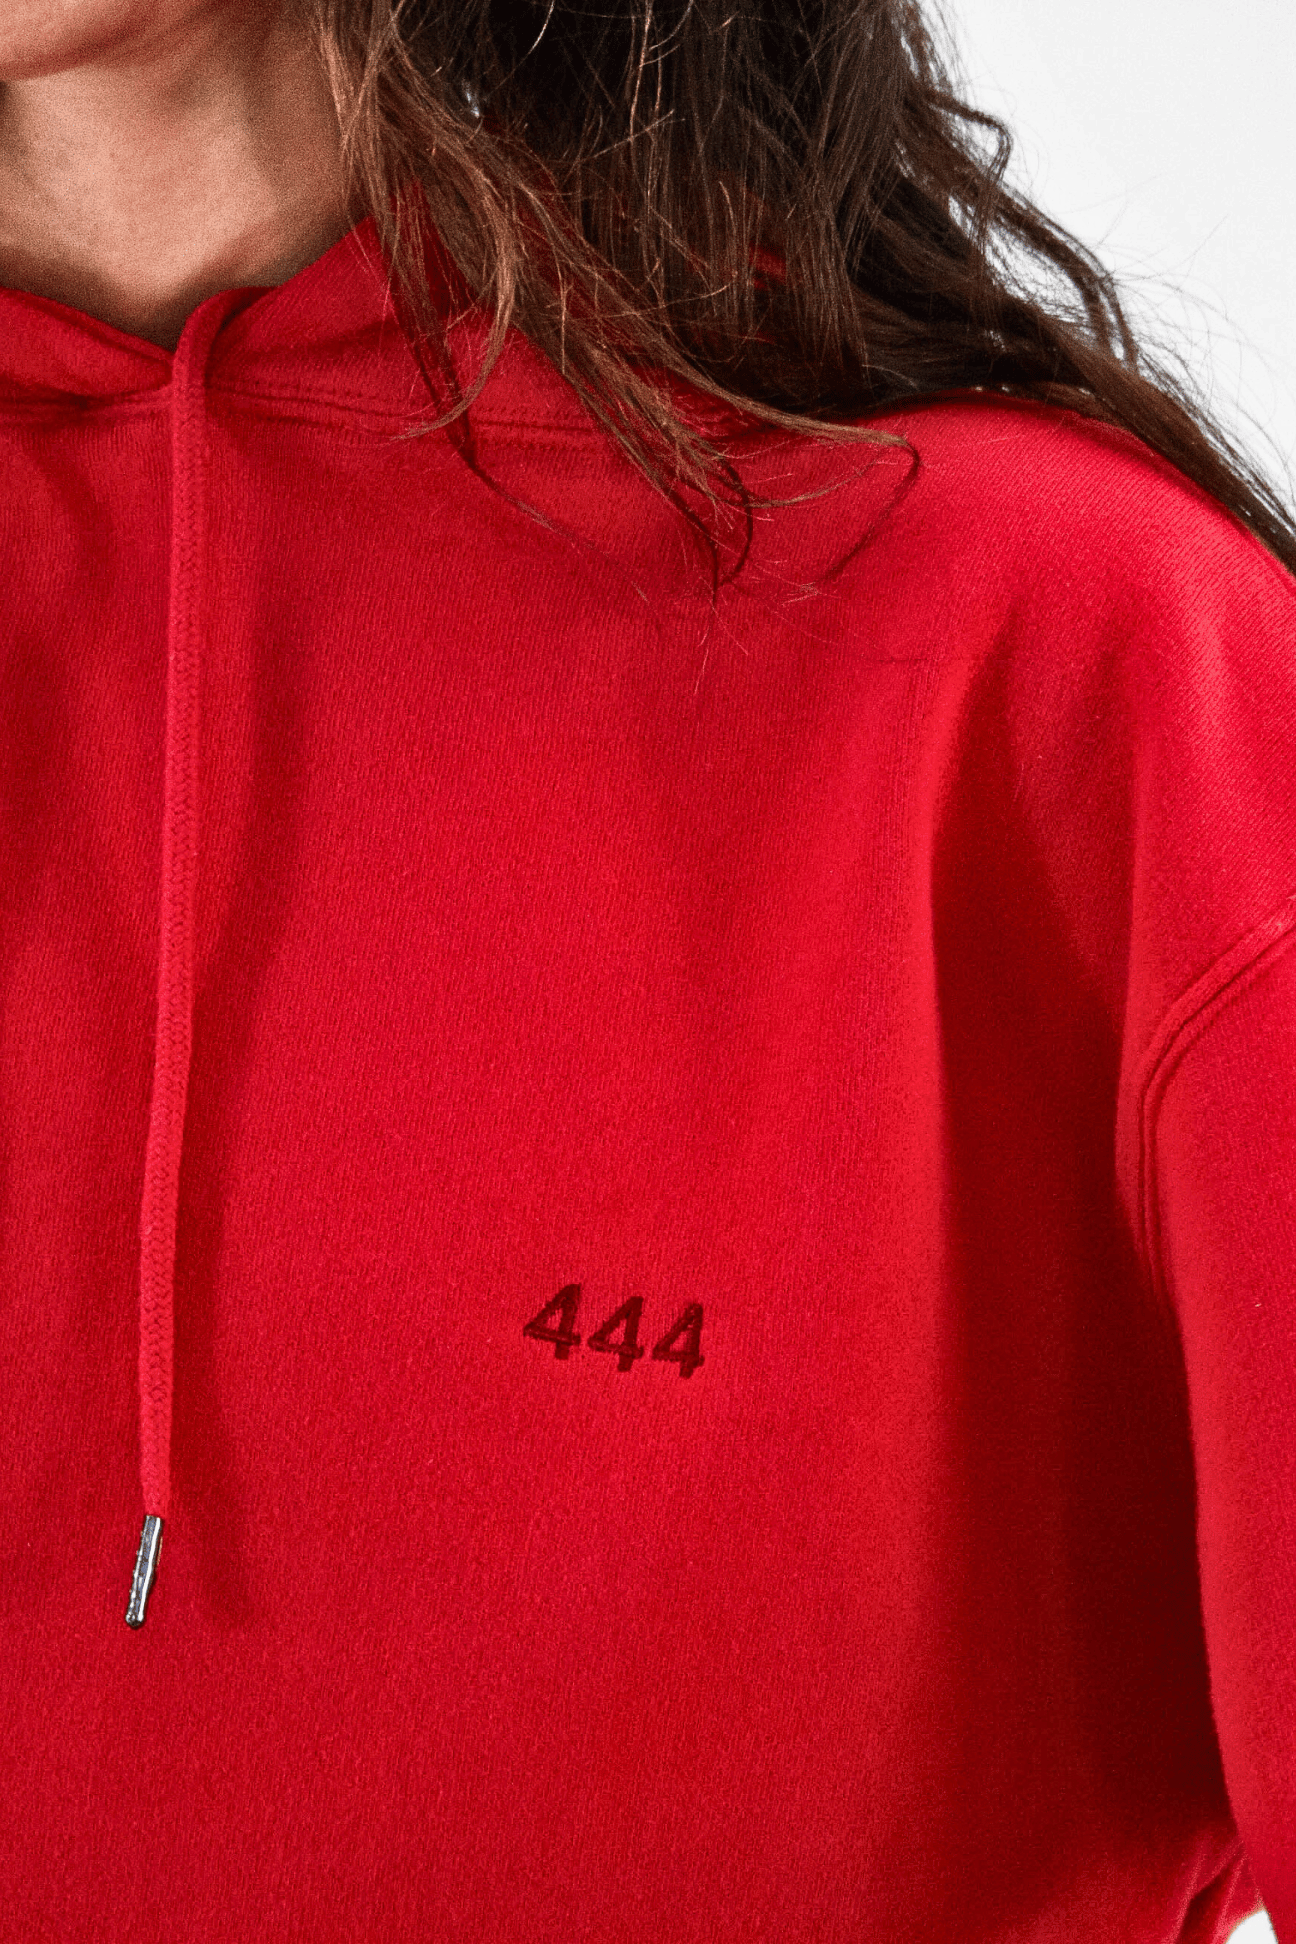 A close-up of a person in a GFLApparel Angel Number 444 Hoodie, symbolizing a spiritual journey with the number 